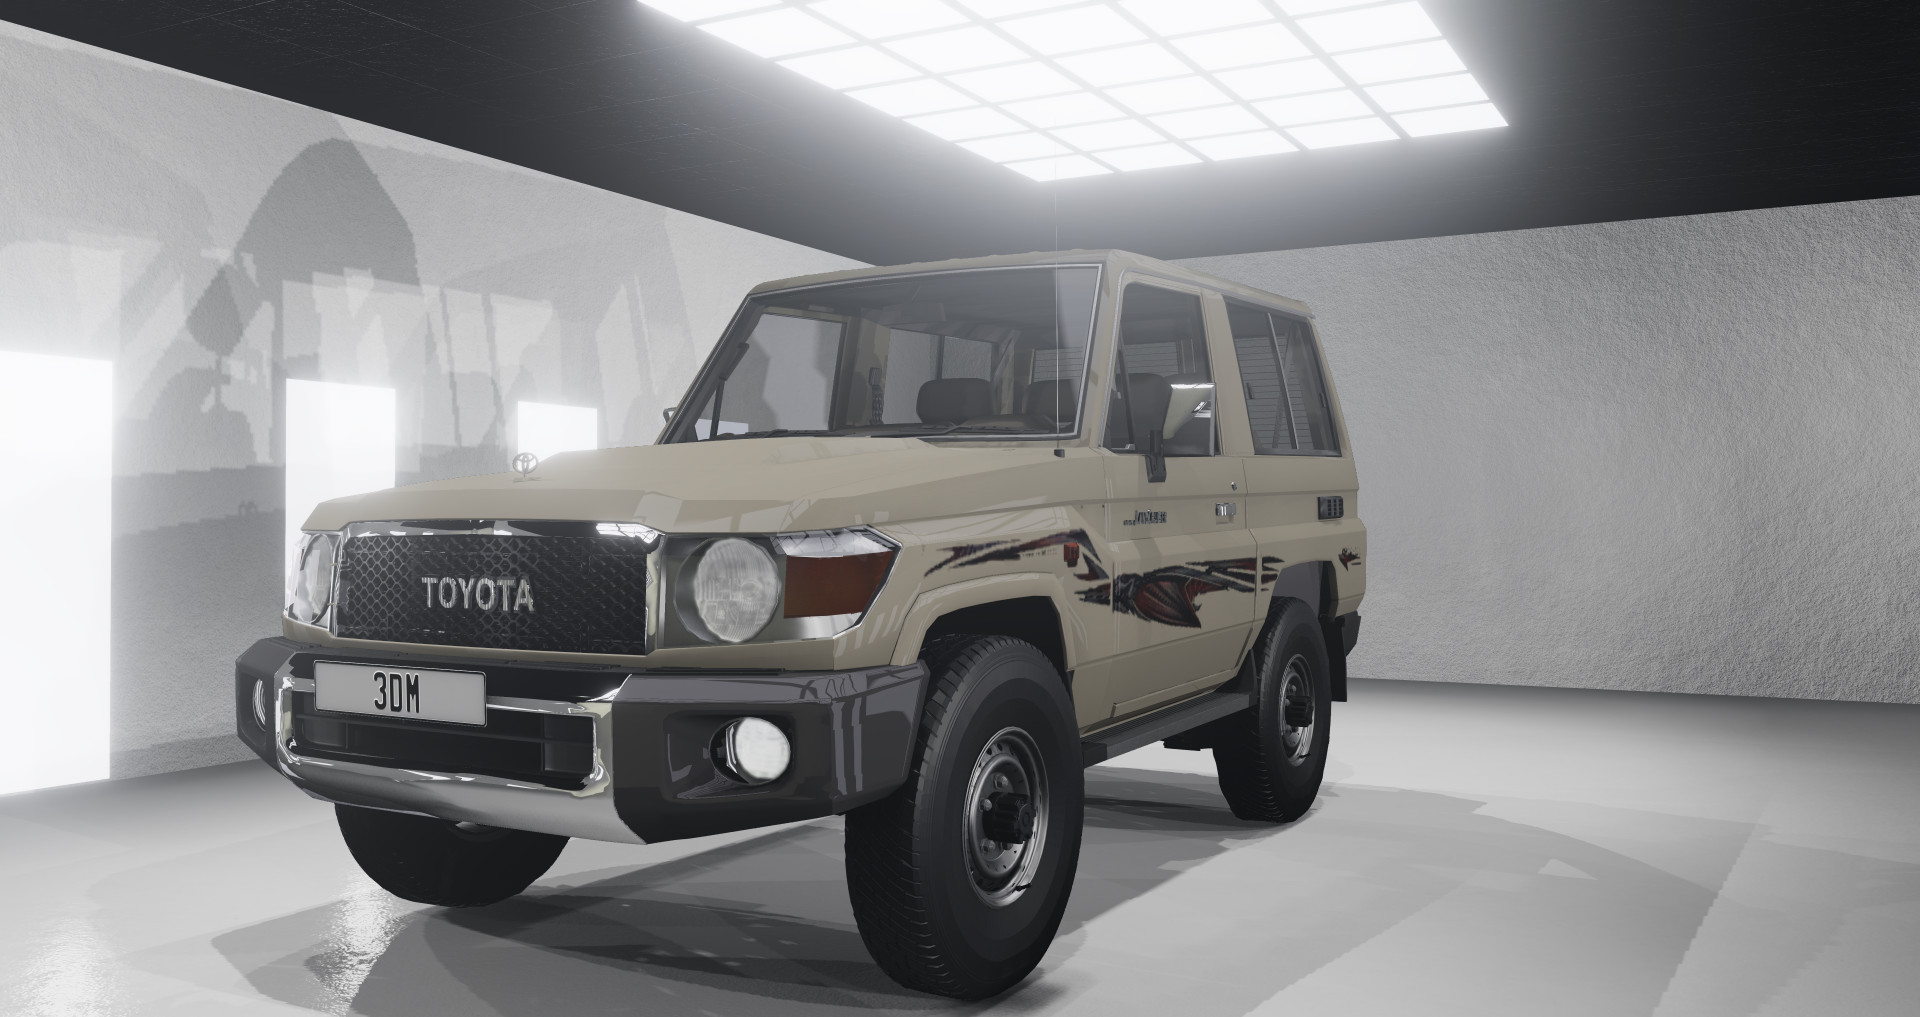 TOYOTA Rb3 by 3dm